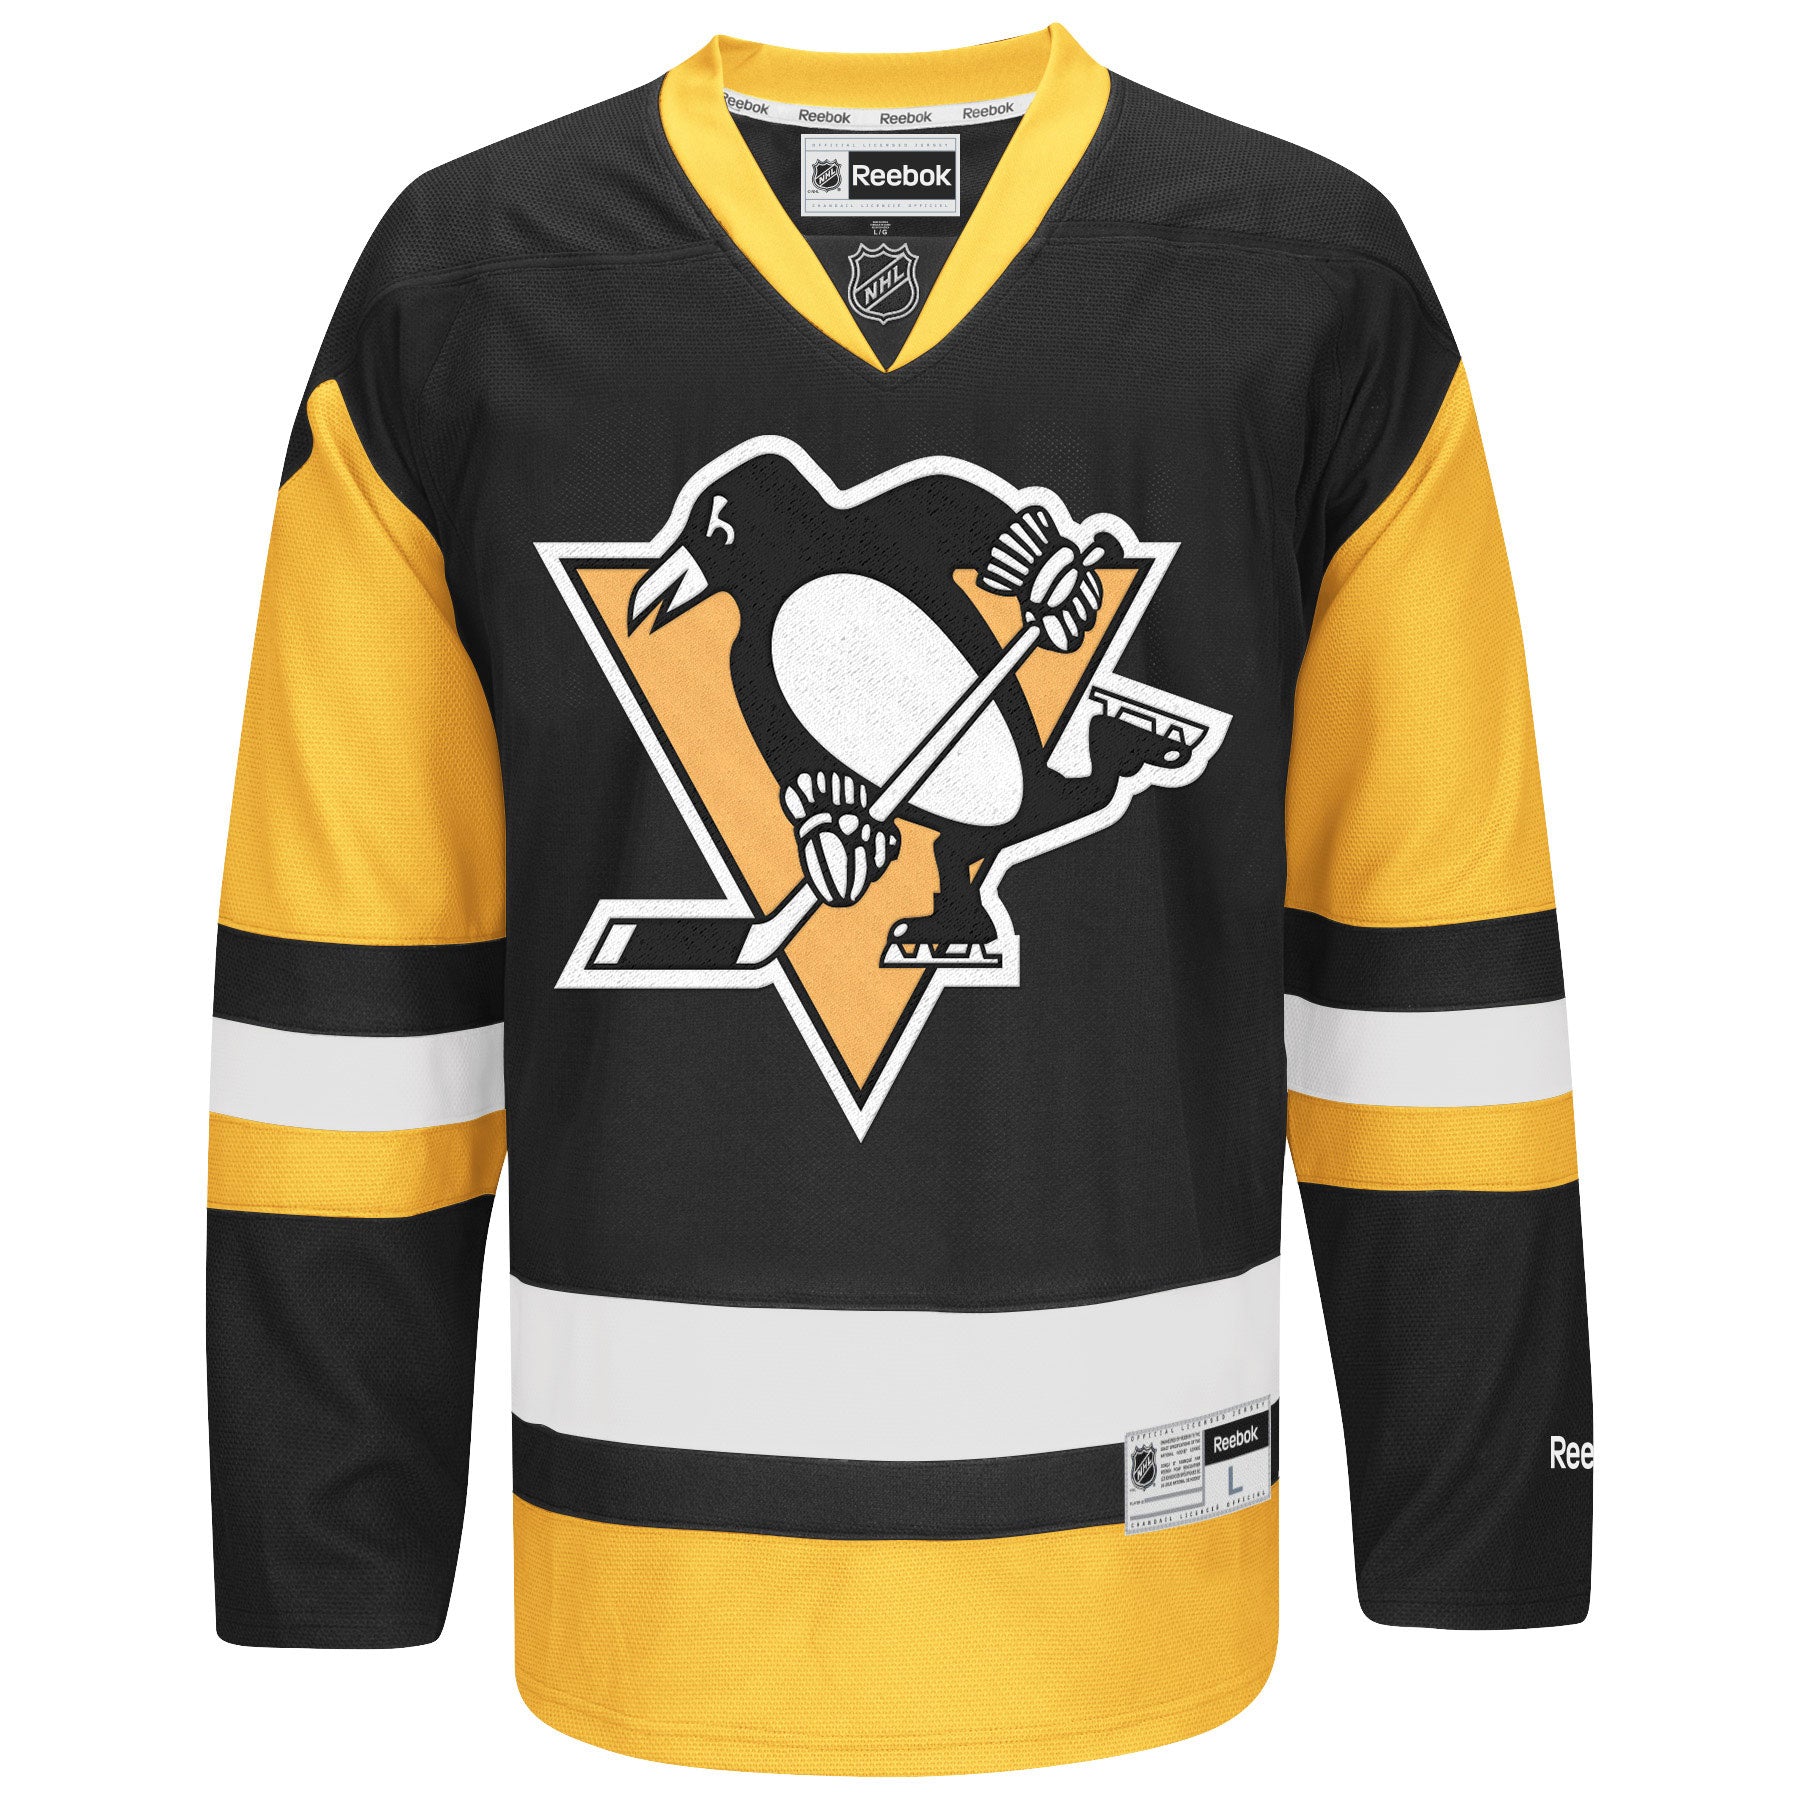 Check out the Penguins' new alternate jerseys